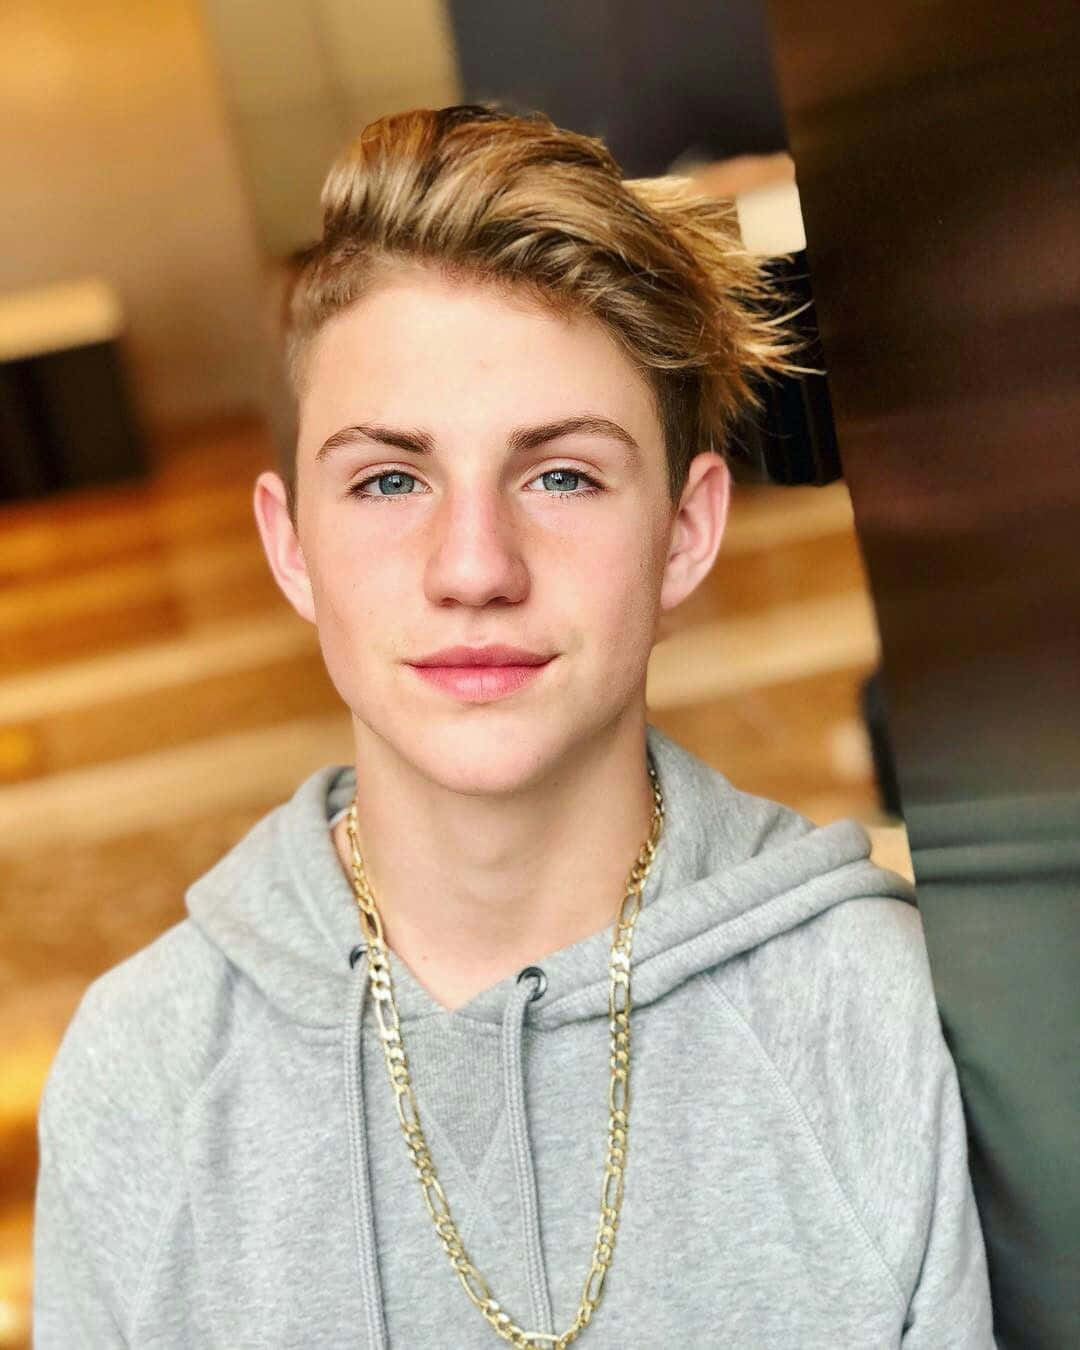 Mattyb With Chain Necklace Background